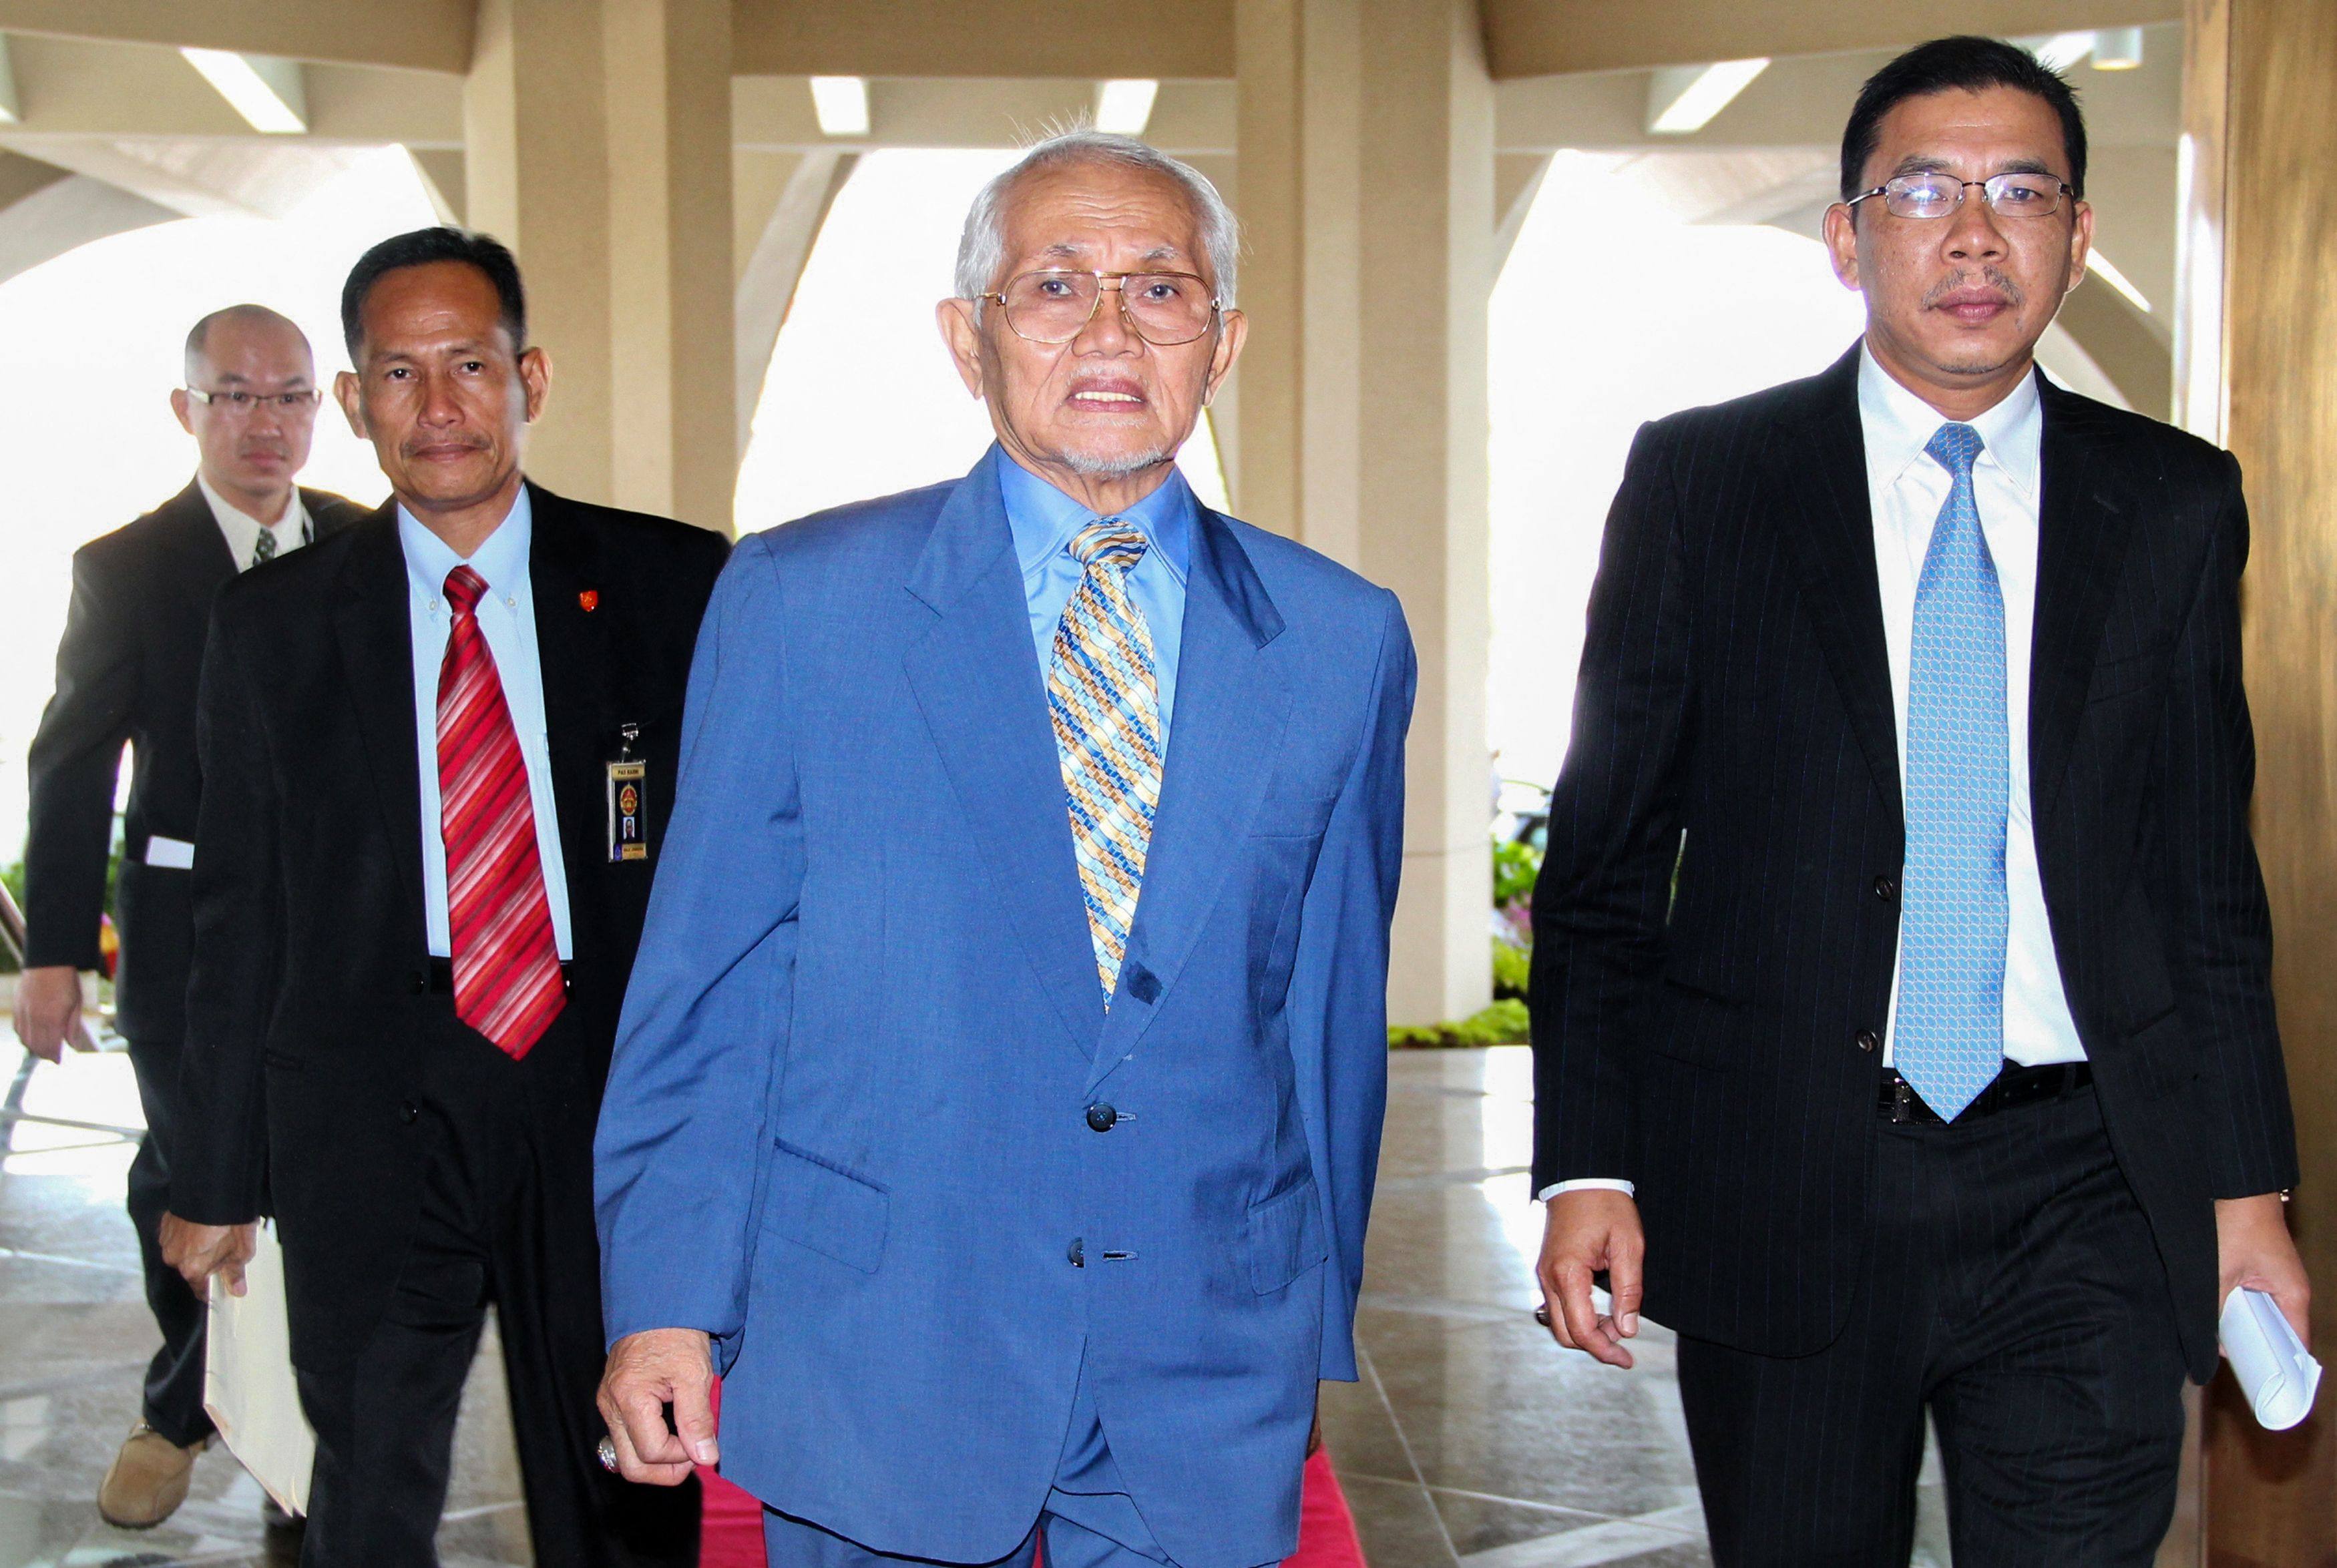 Sarawak chief minister Taib Mahmud (centre) arriving at the Sarawak state legislative assembly in Kuching on May 21, 2013. Photo: AFP